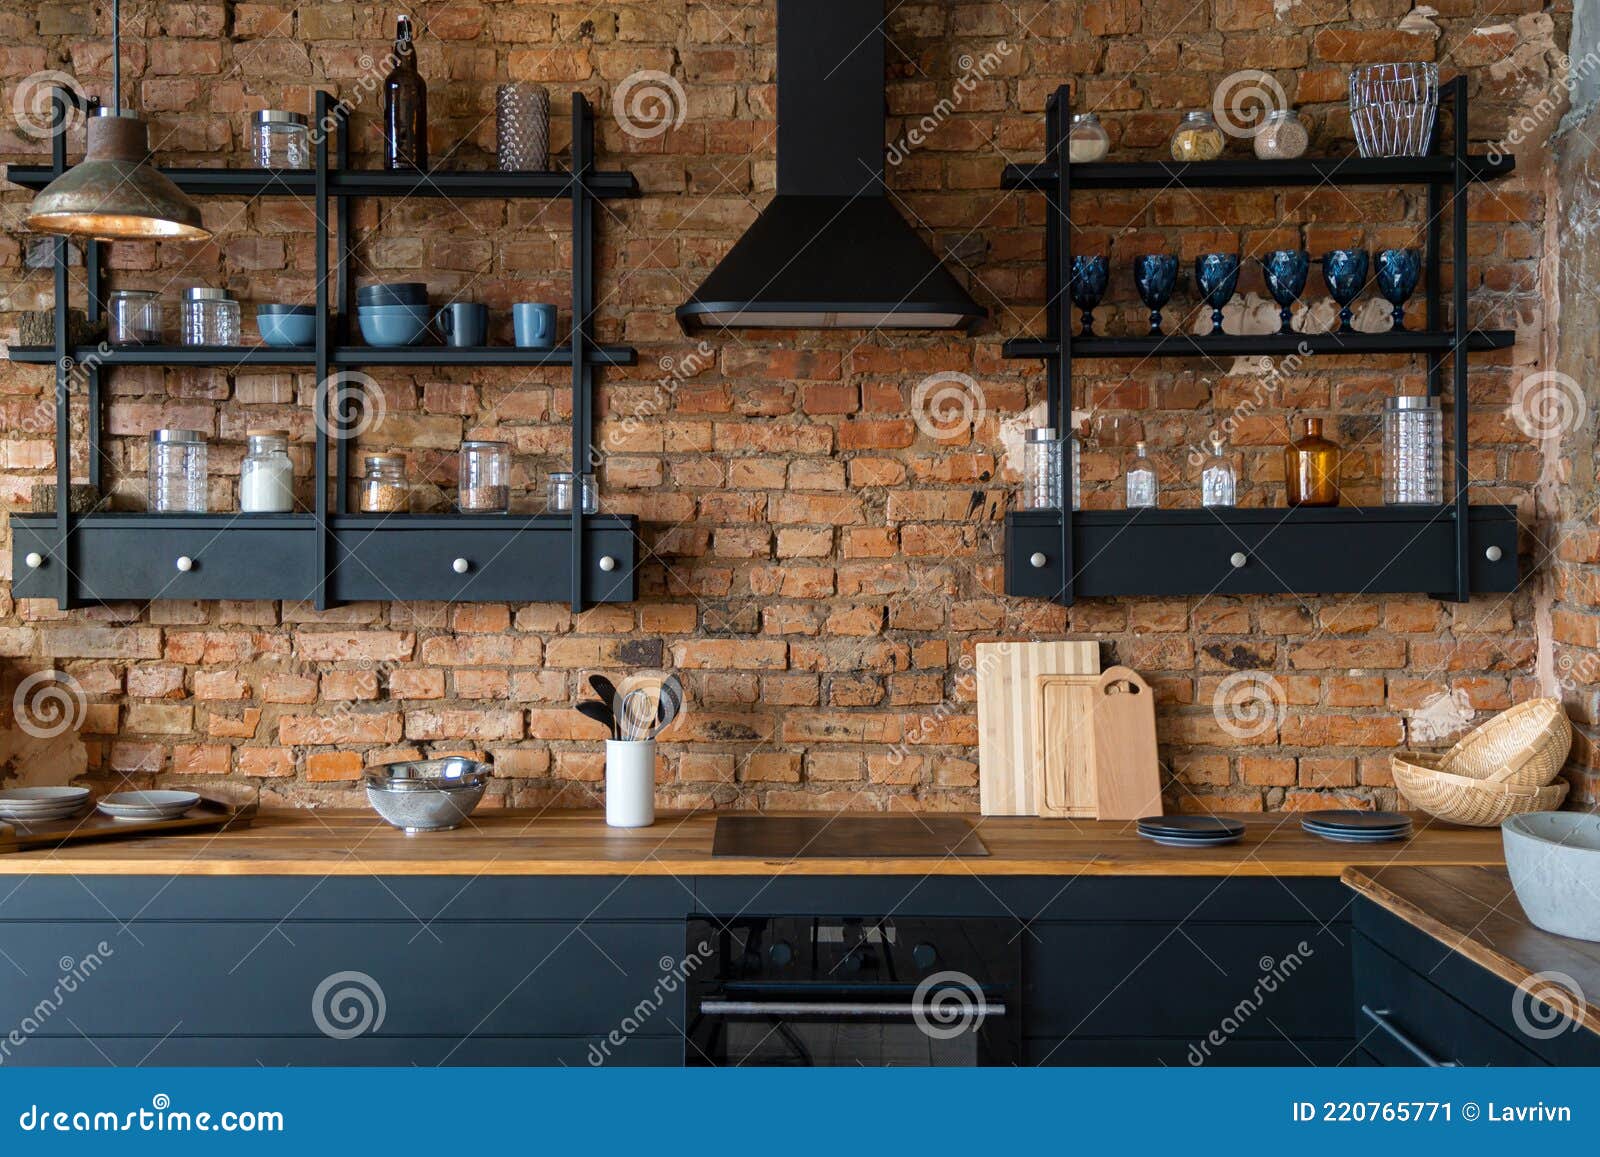 Vew on Open Space Industrial Loft Kitchen with Vintage Decor and ...